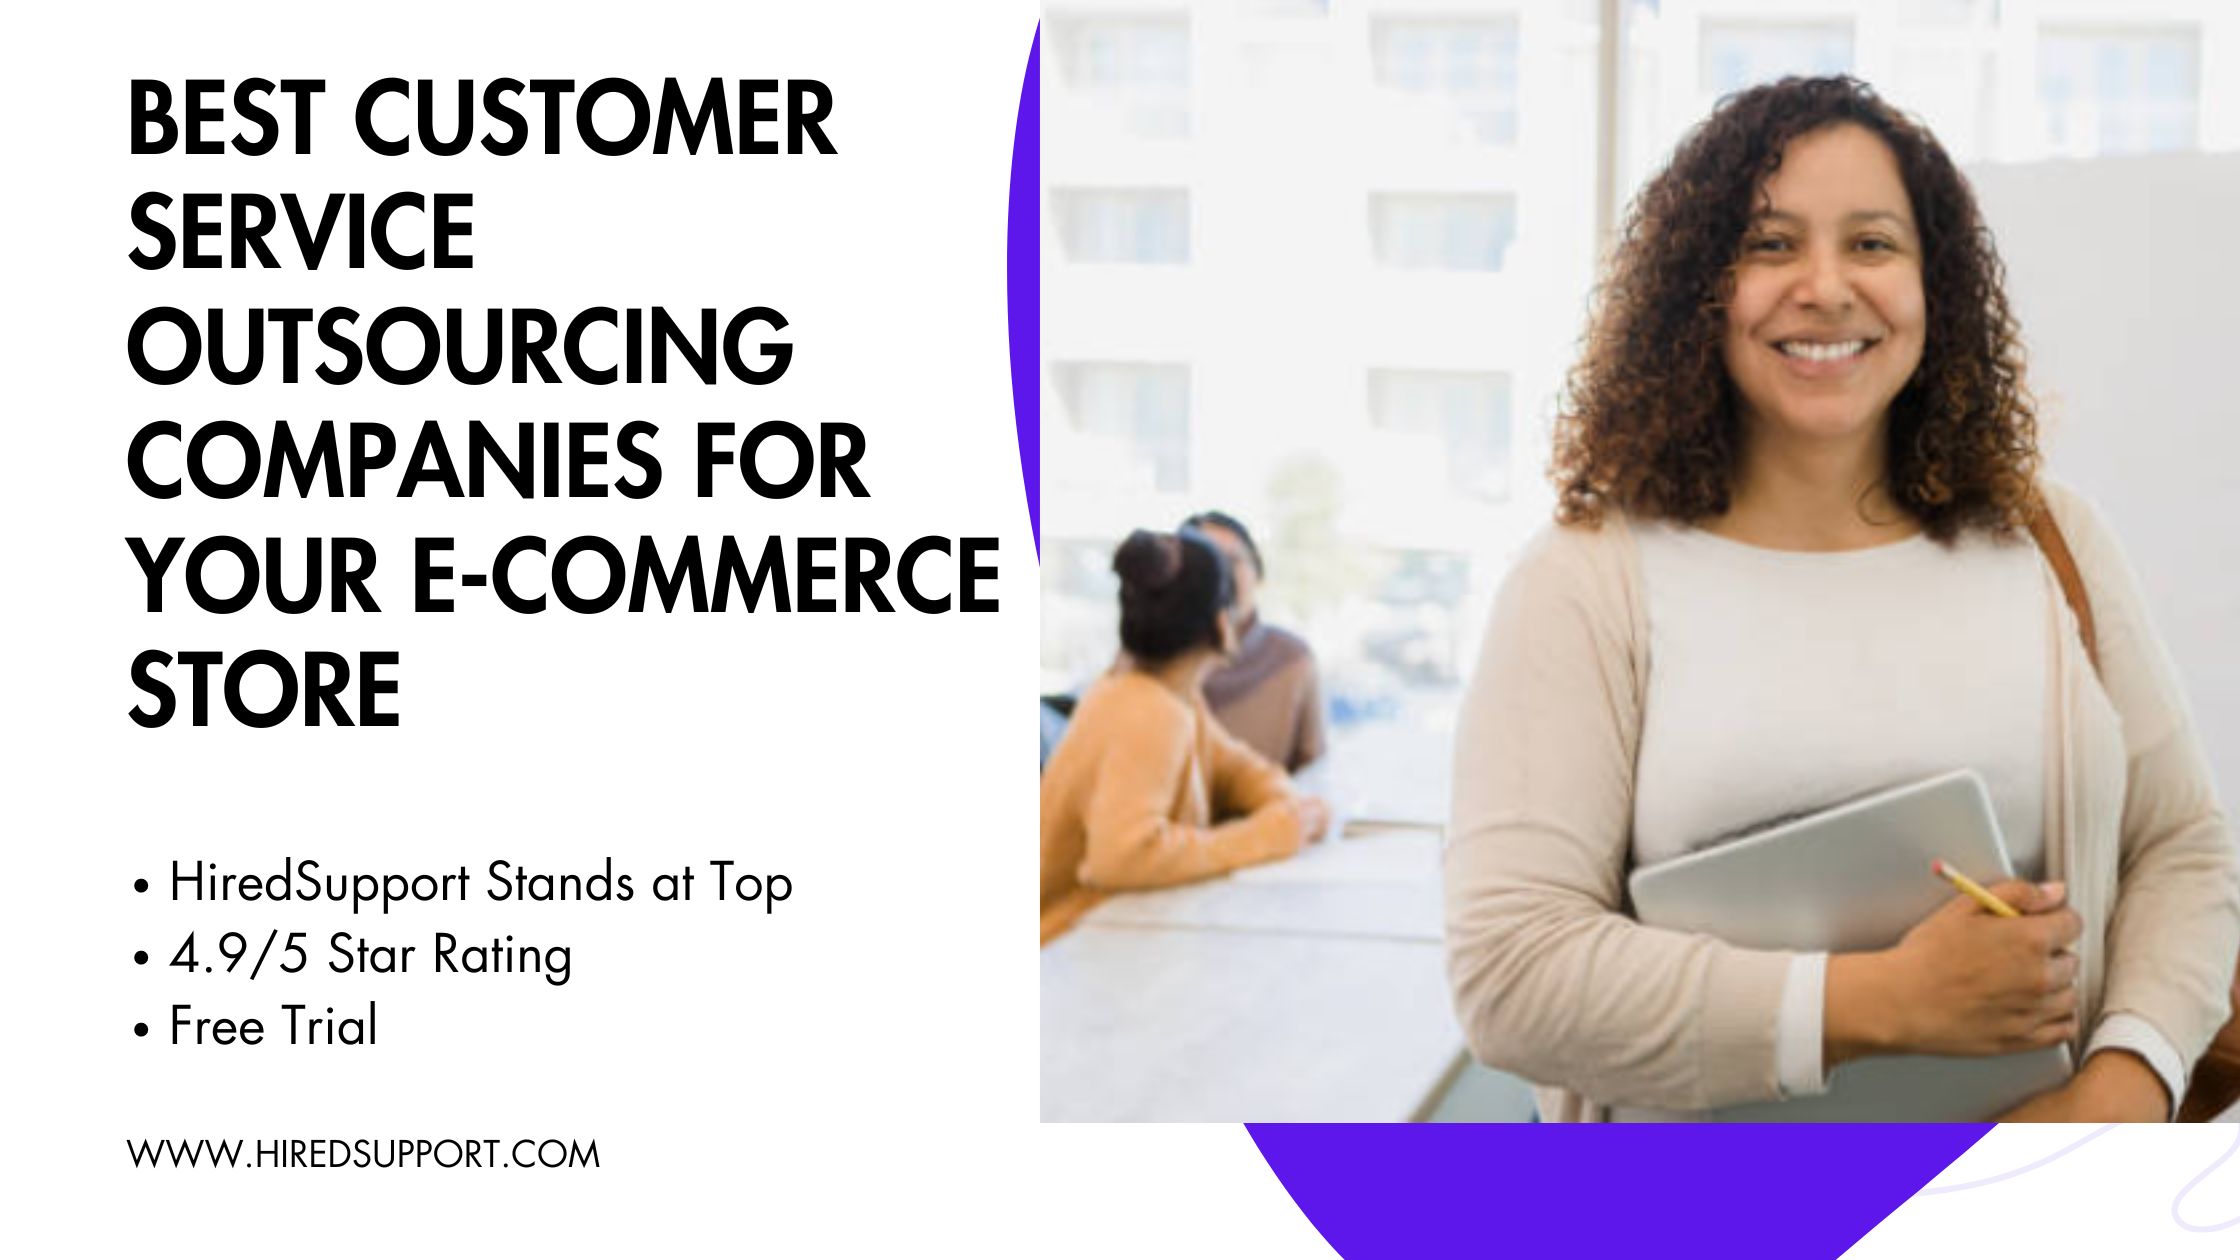 Best Customer Service Outsourcing Companies for Your E-commerce Store